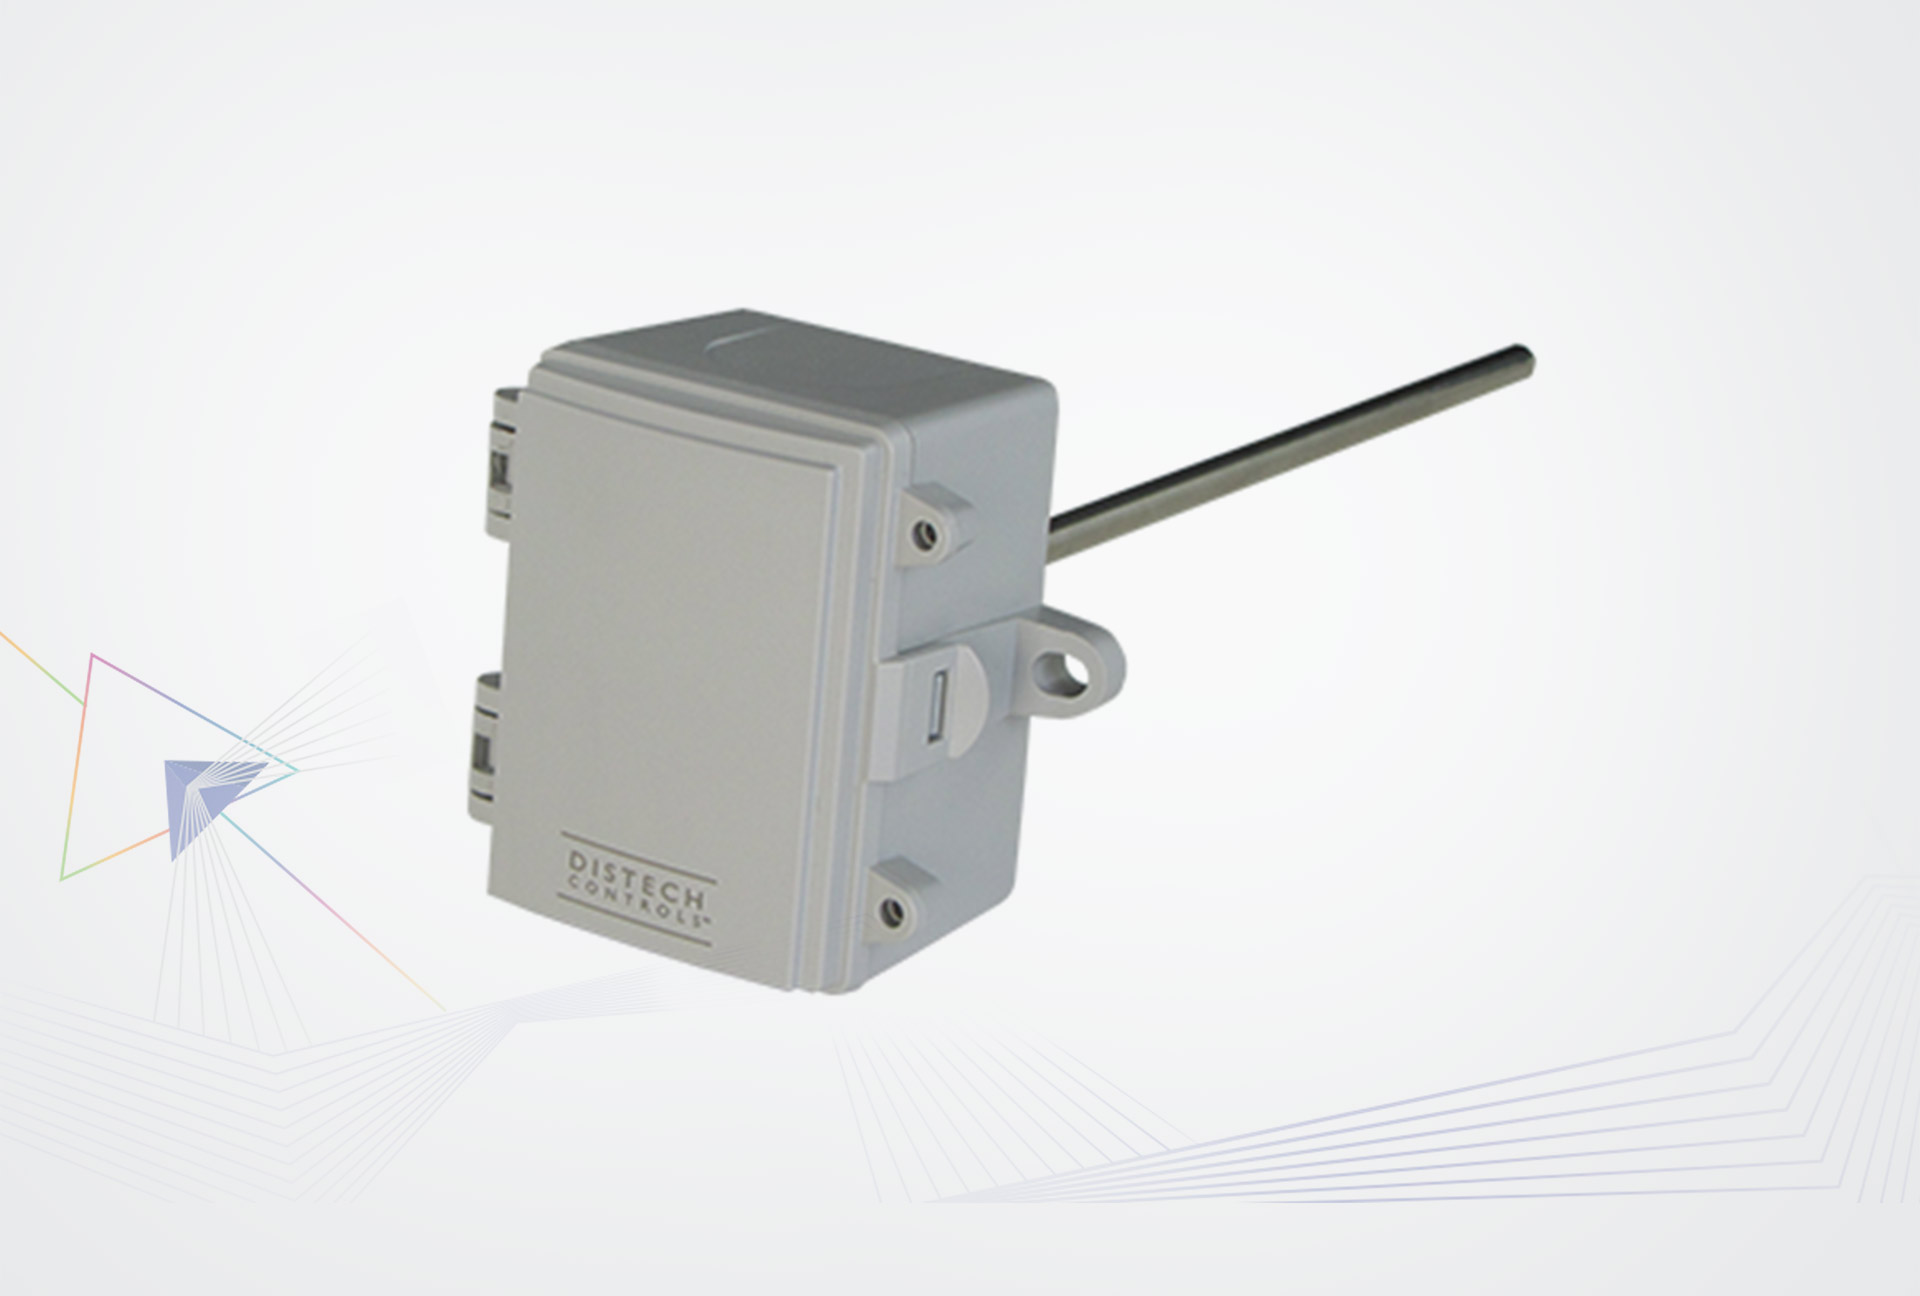 New Temperature Sensor Series for HVAC and Building Technology